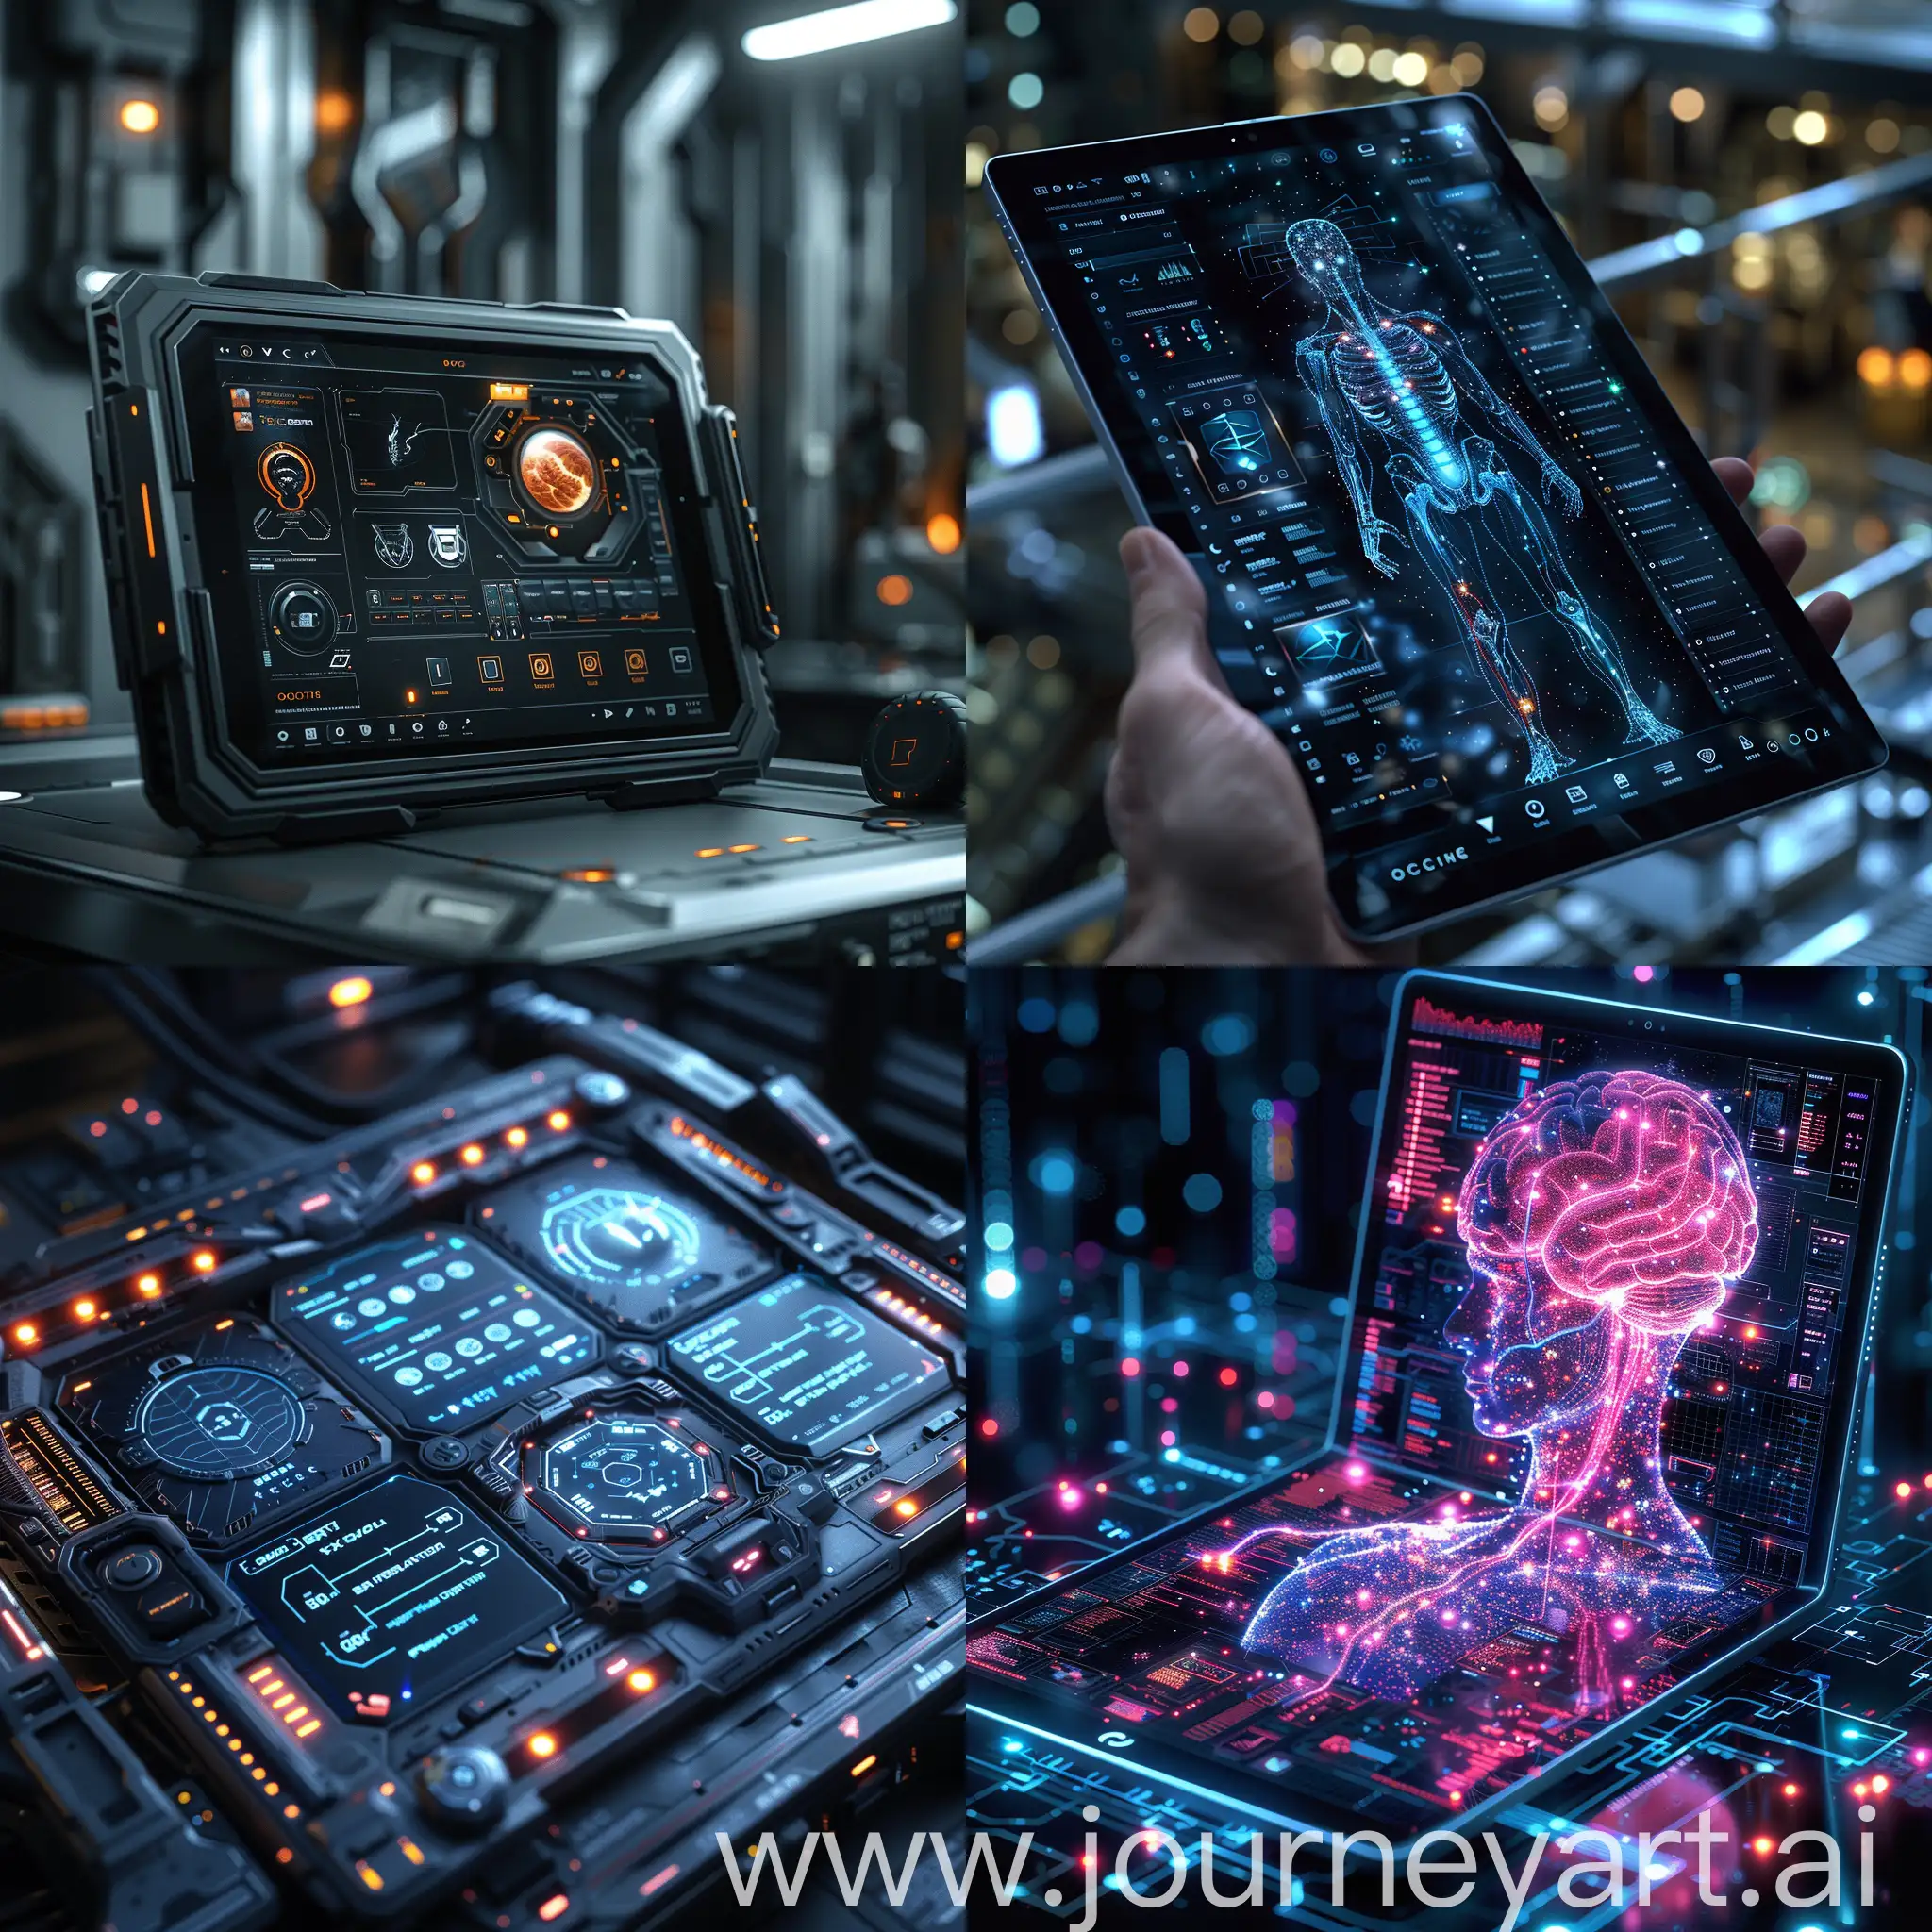 Futuristic-Neuro-Tablet-with-Raw-Stylized-Octane-Render